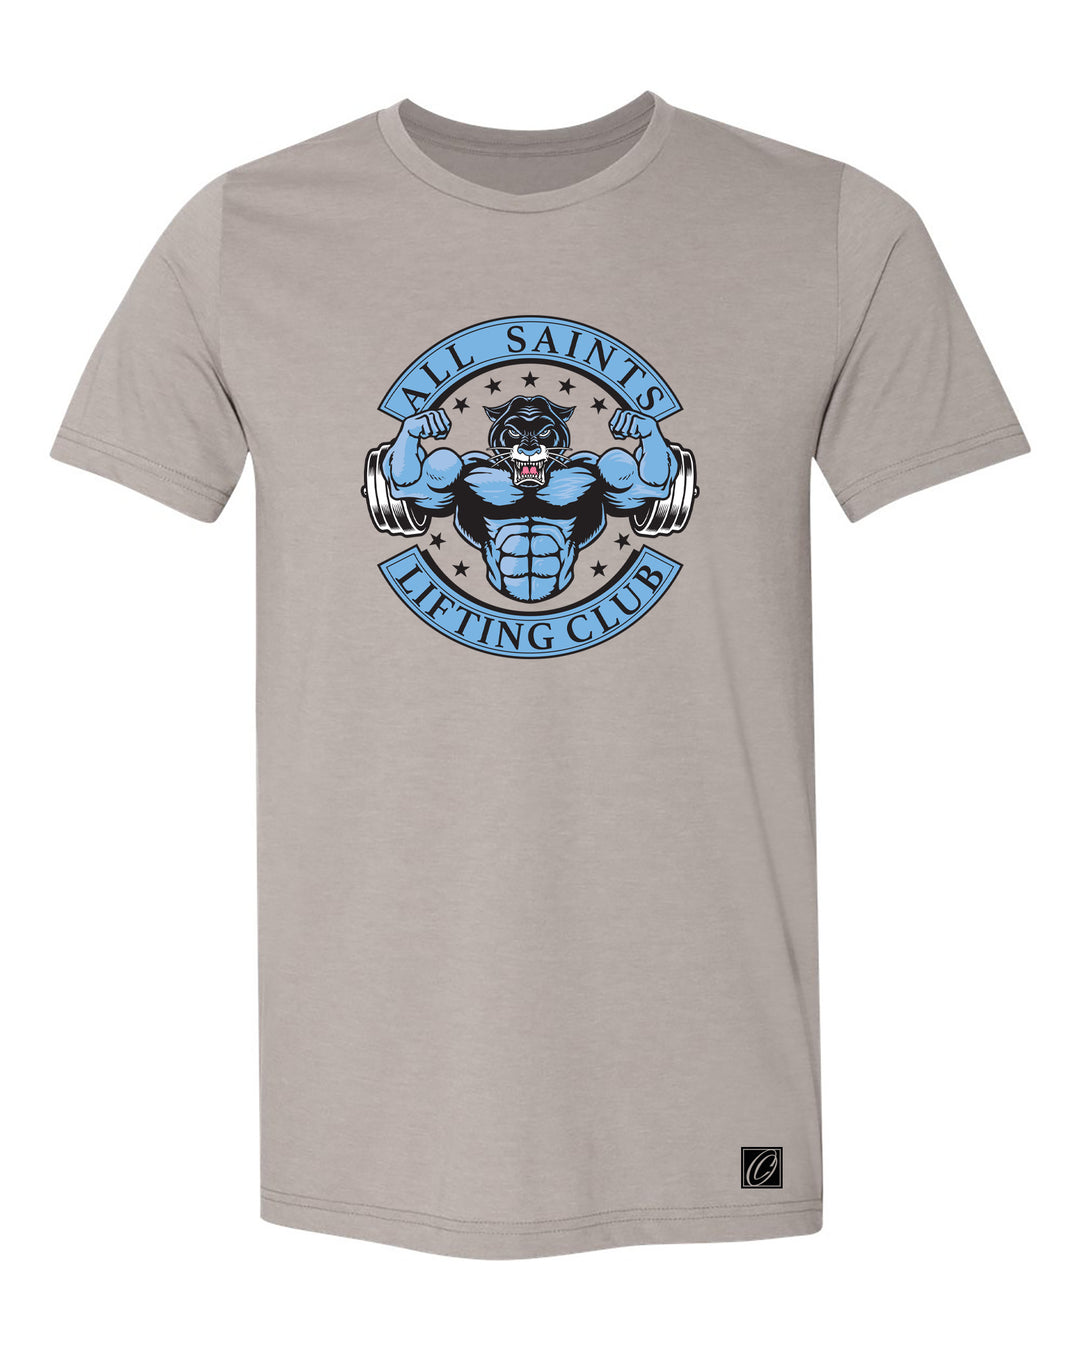 All Saints Cougars Lifting Club - Official Member - Select Weight Class - Youth and Adult Tee